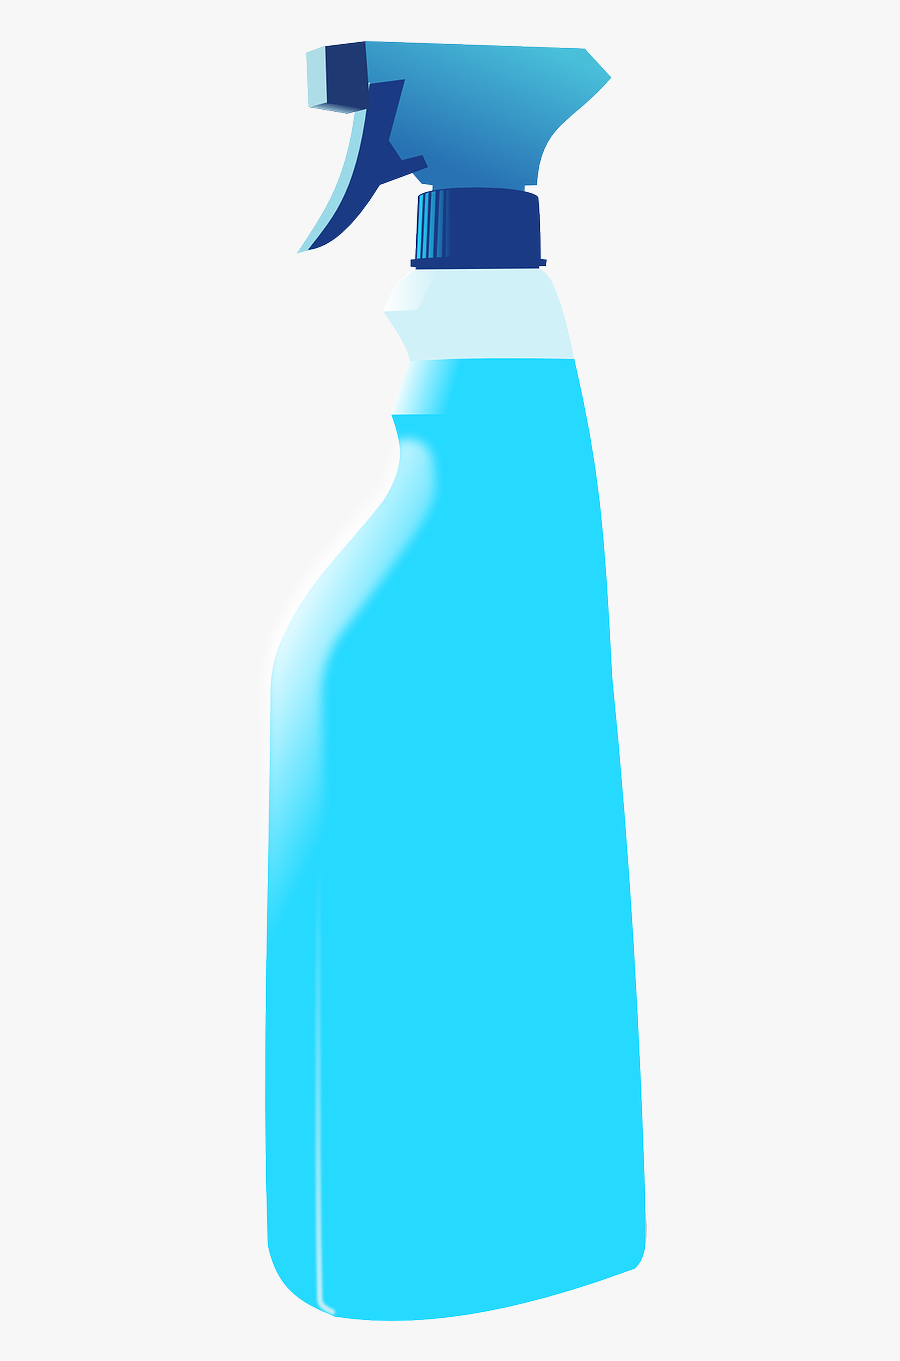 Squirt Bottle , Free Transparent Clipart - ClipartKey.